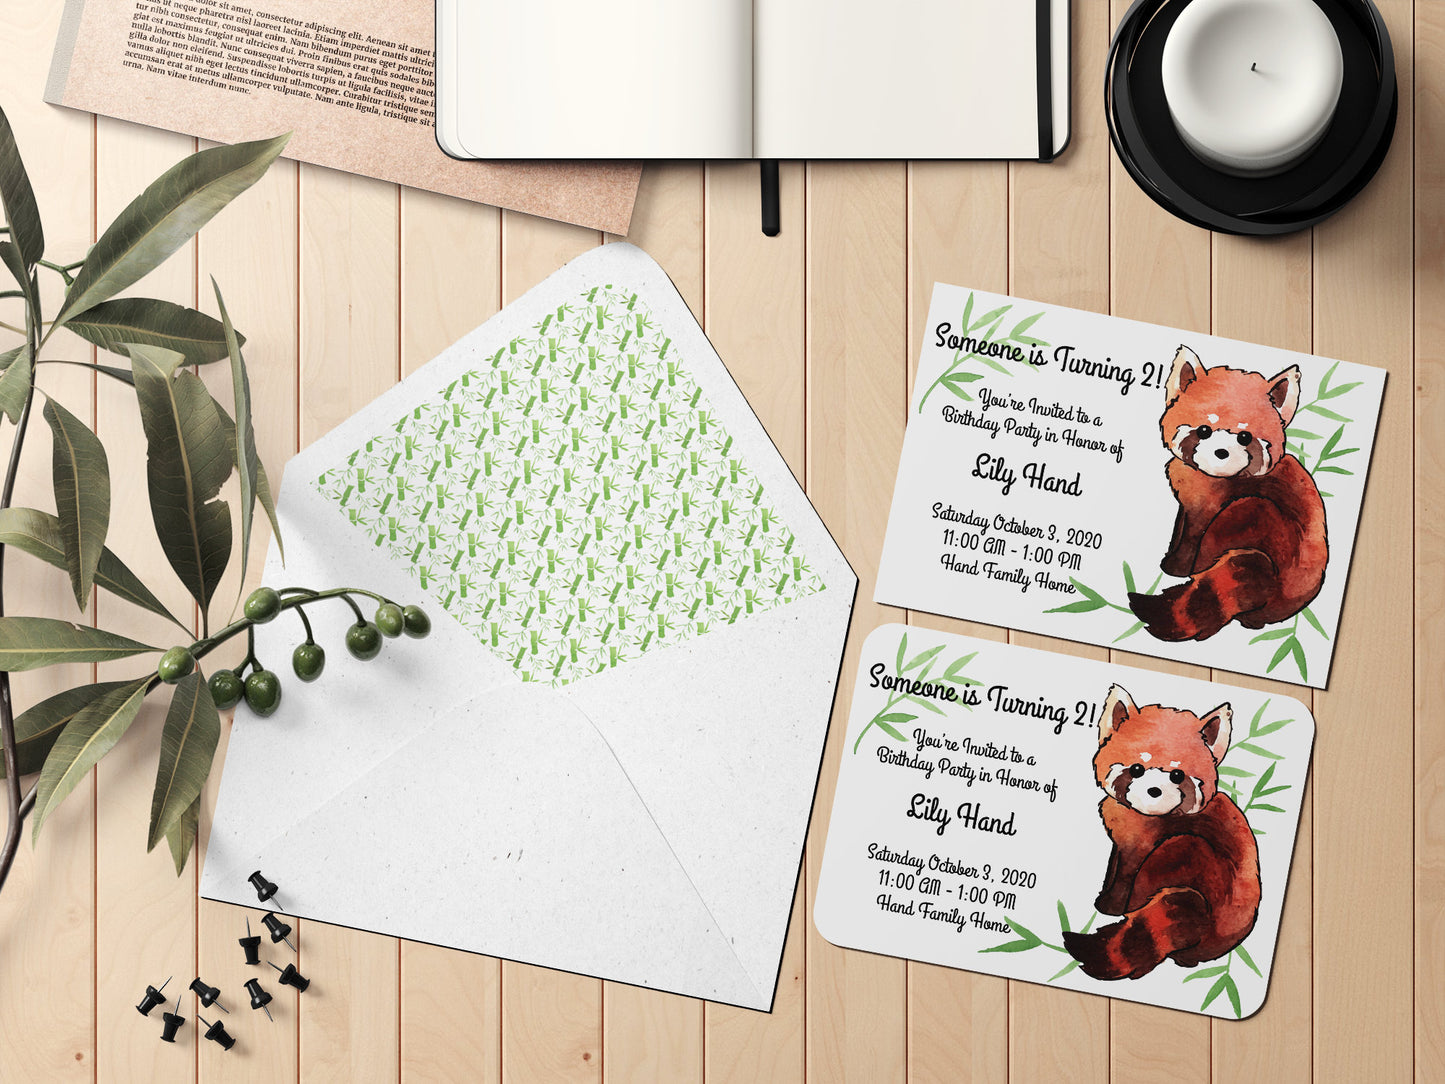 Watercolor Red Panda & Bamboo Digital Clipart and Scrapbook Papers / backgrounds, Baby Shower Invitation, Birthday Party Invite, Zoo Theme